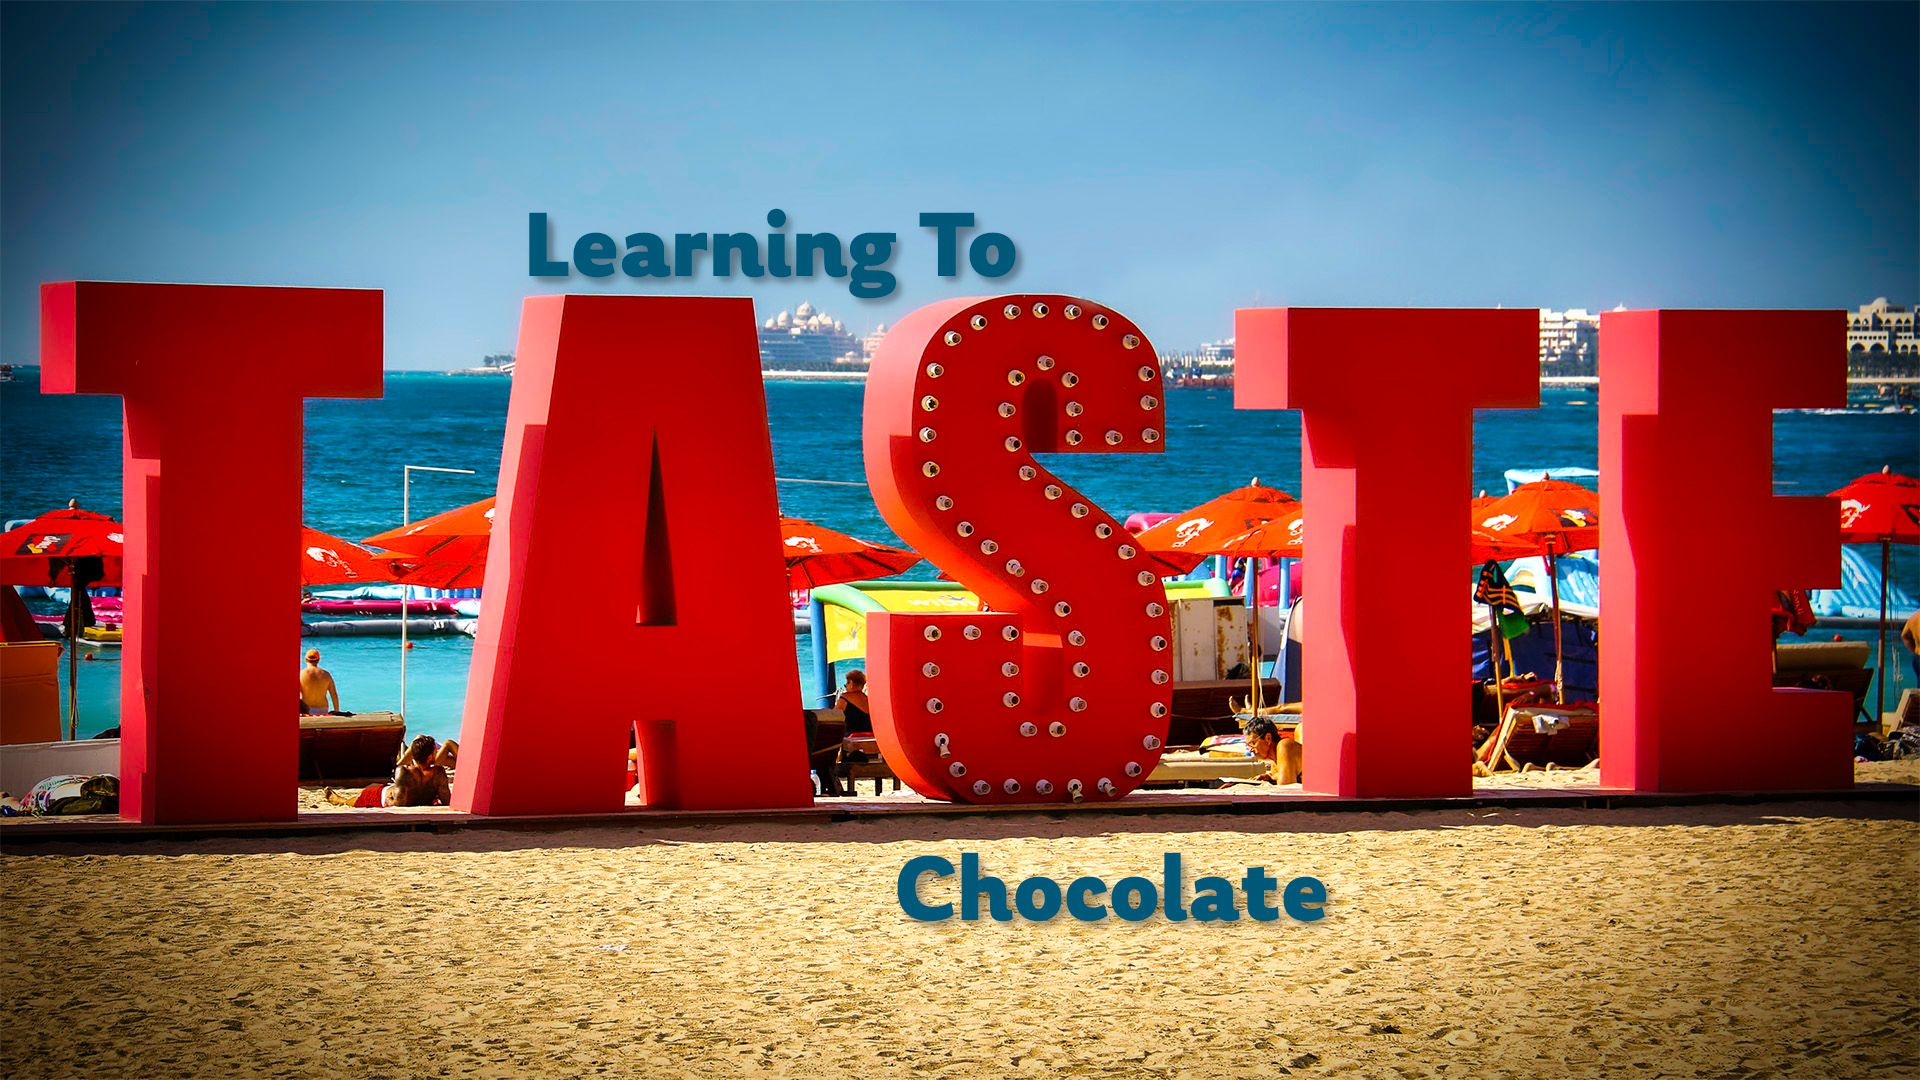 TheChocolateLife::LIVE – How I Learned To Taste ... Anything & Everything